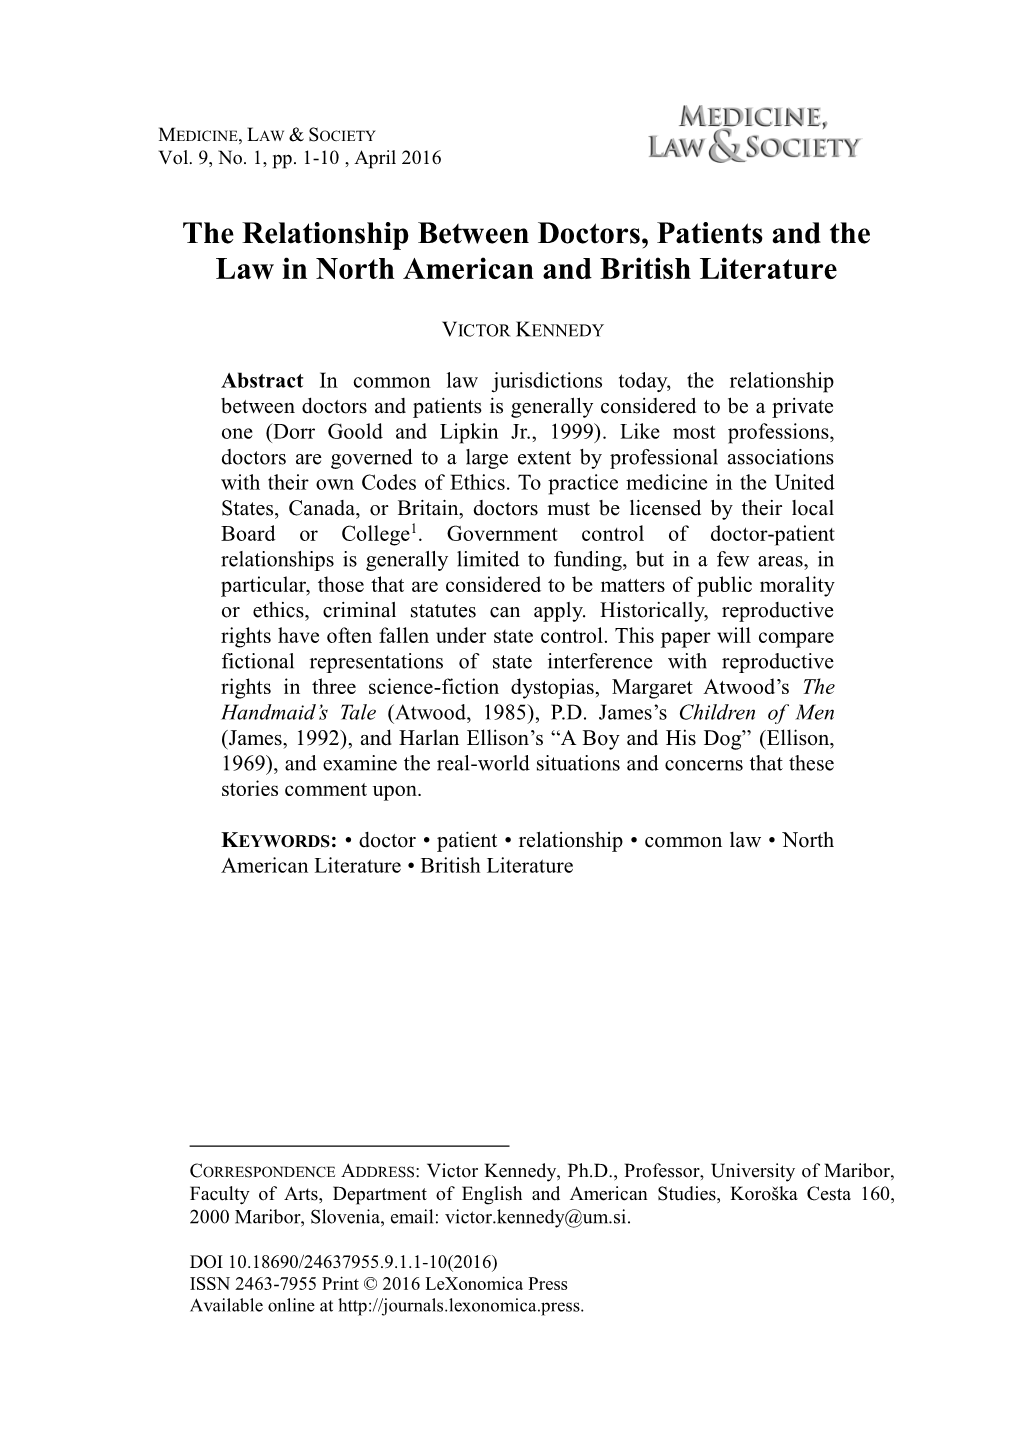 The Relationship Between Doctors, Patients and the Law in North American and British Literature